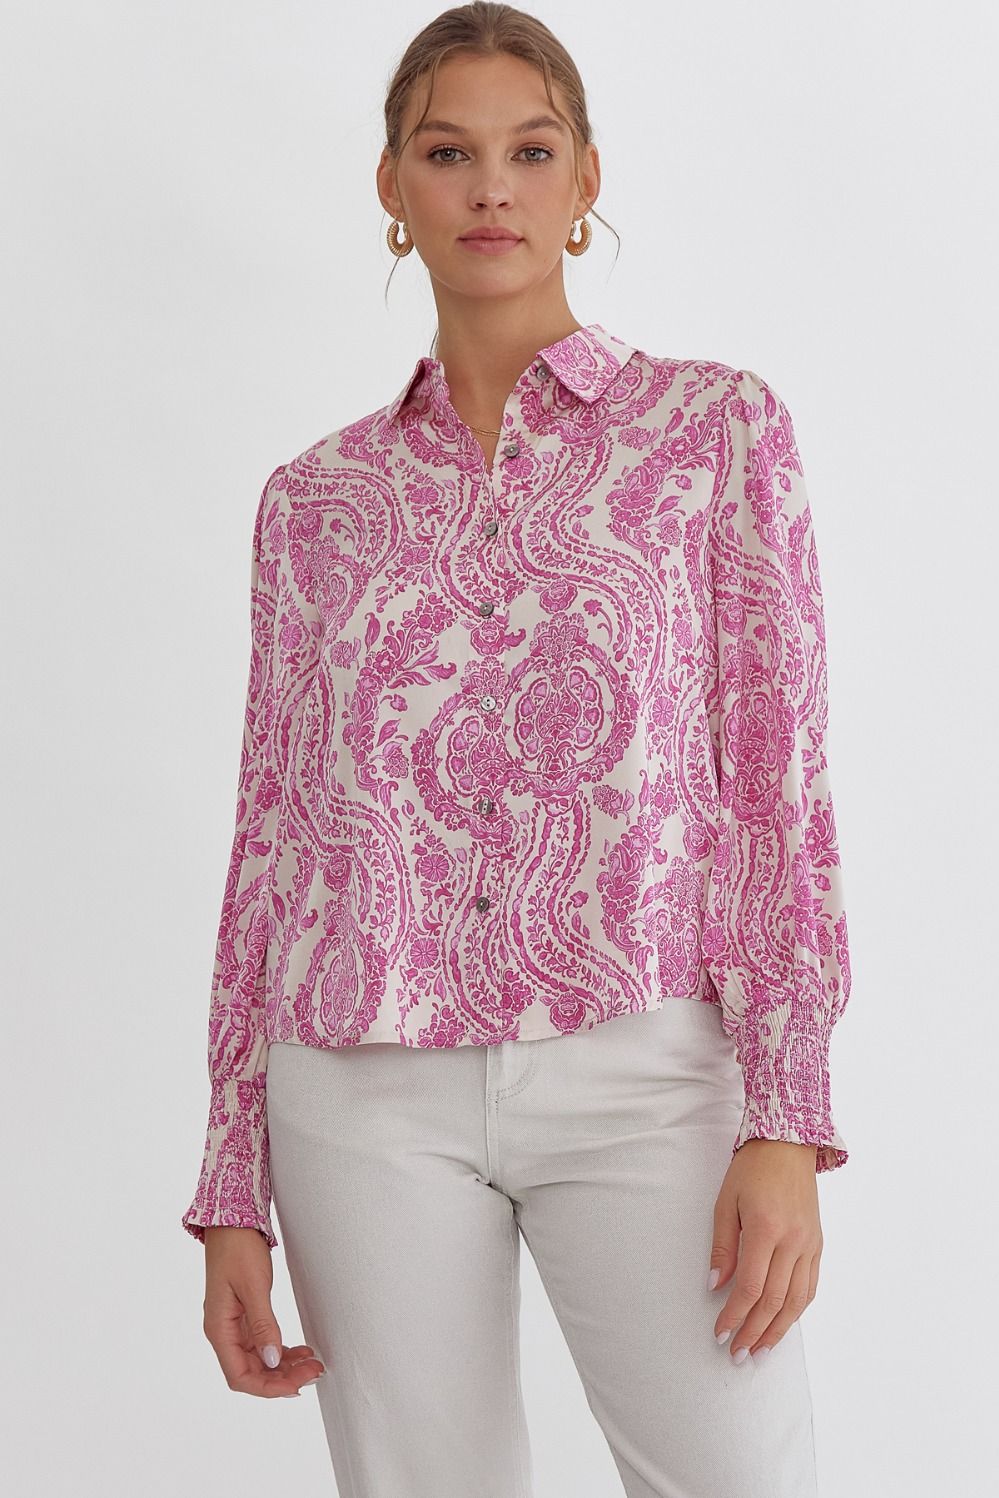 Entro Satin button down top in cream and pink paisley print